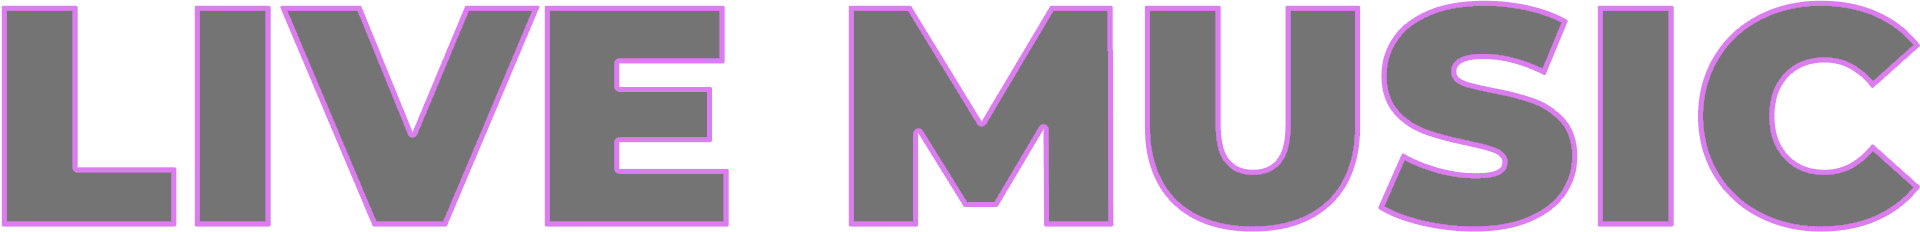 A purple and black letter m on a green background